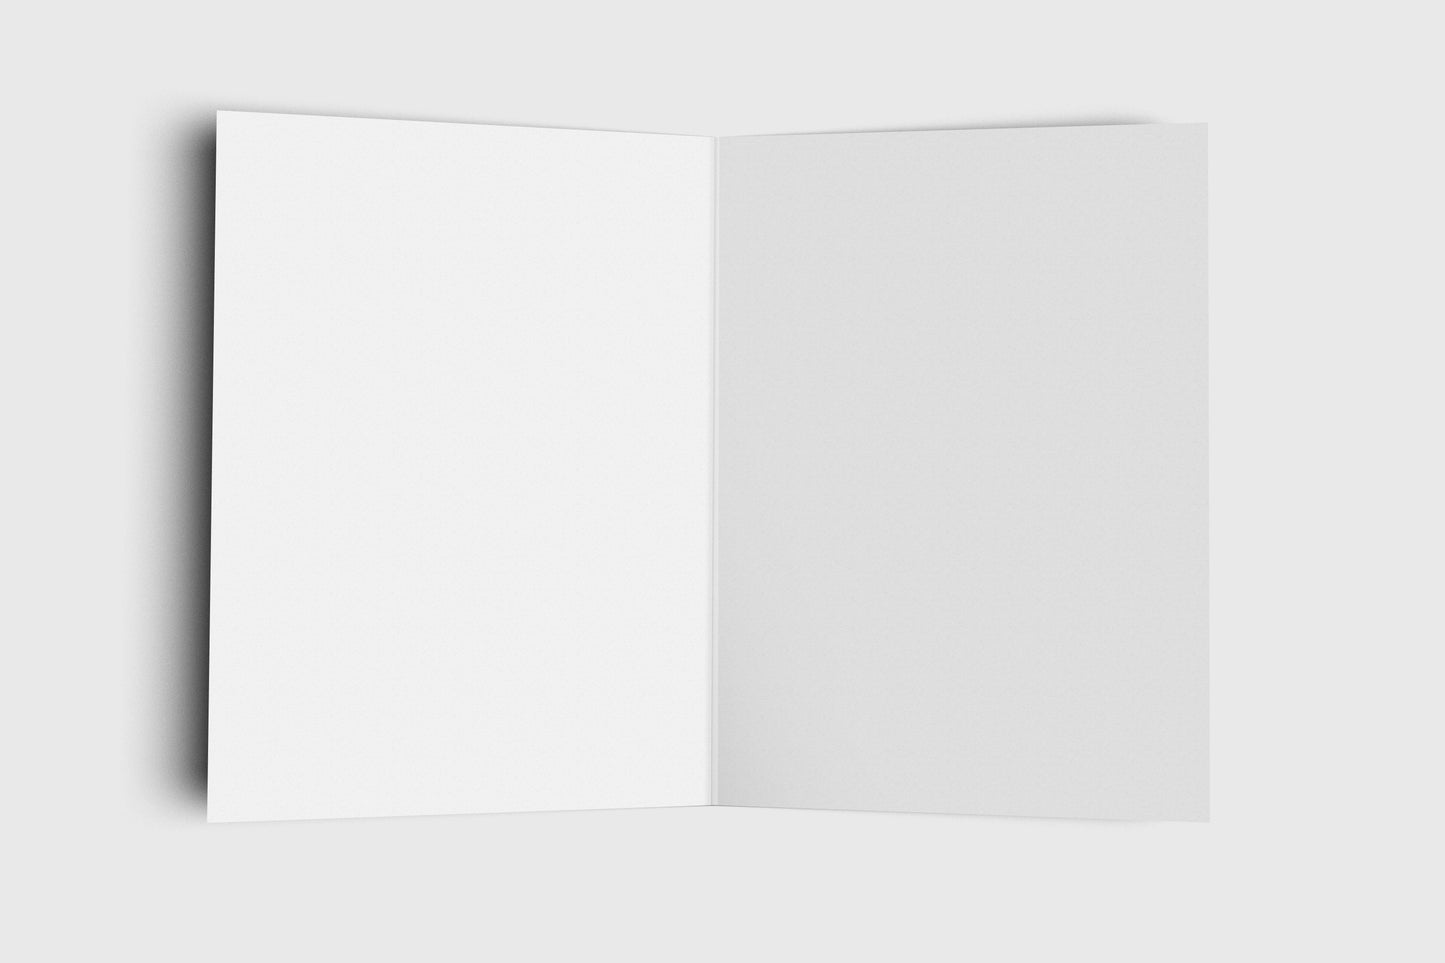 Oh Hell Yeah - Hype Greeting Card - Congrats - Excited - Happy Birthday - Proud of You - Celebrate - Minimalist Greeting Card